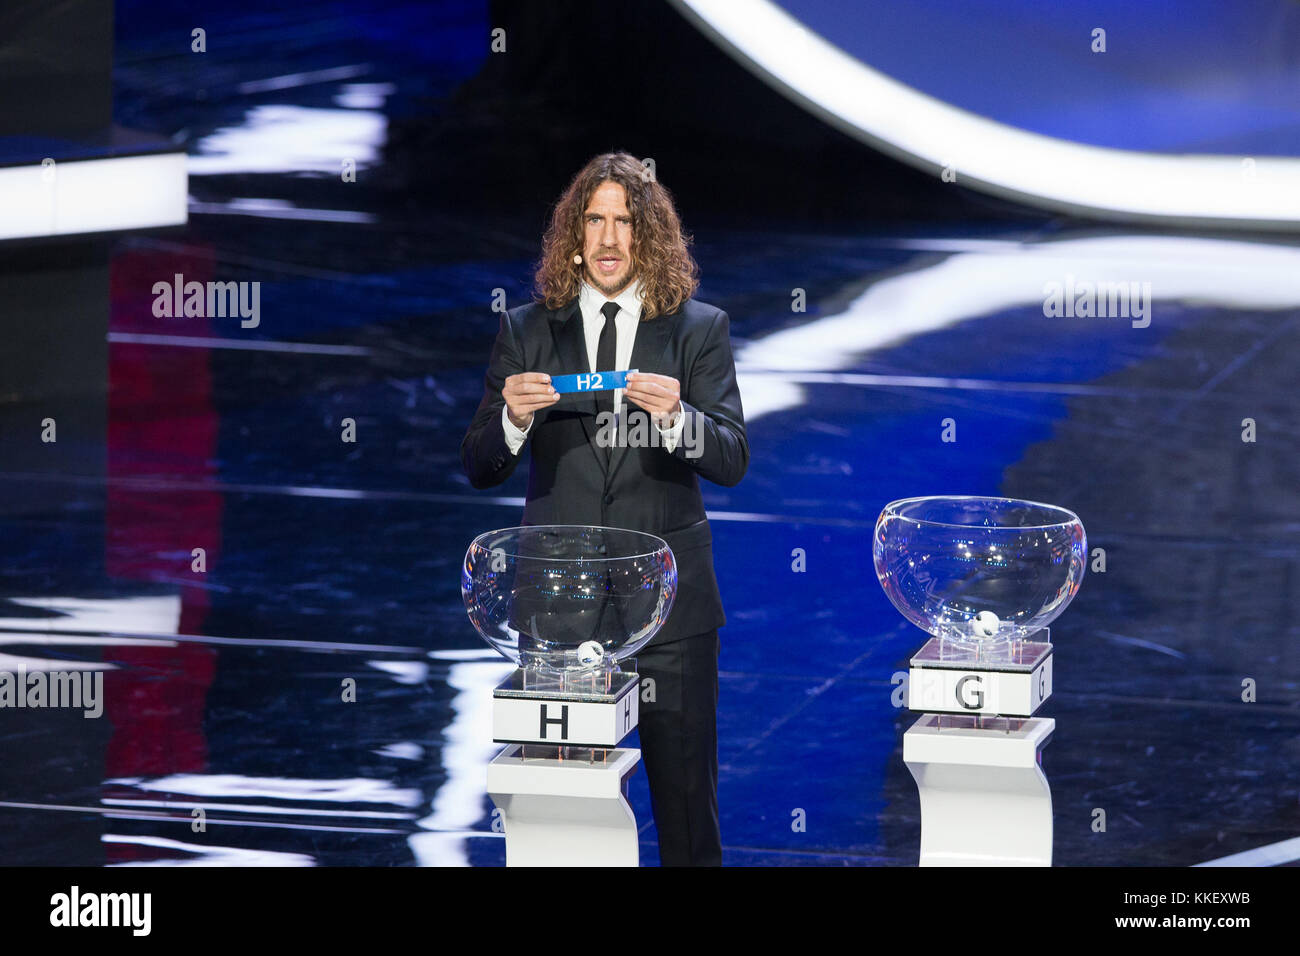 Moscow, Russia. 1st Dec, 2017. Spain's former soccer player Carles Puyol shows 'H2' during the Final Draw of the FIFA World Cup 2018 at the Kremlin Palace in Moscow, capital of Russia, Dec. 1, 2017. Credit: Bai Xueqi/Xinhua/Alamy Live News Stock Photo